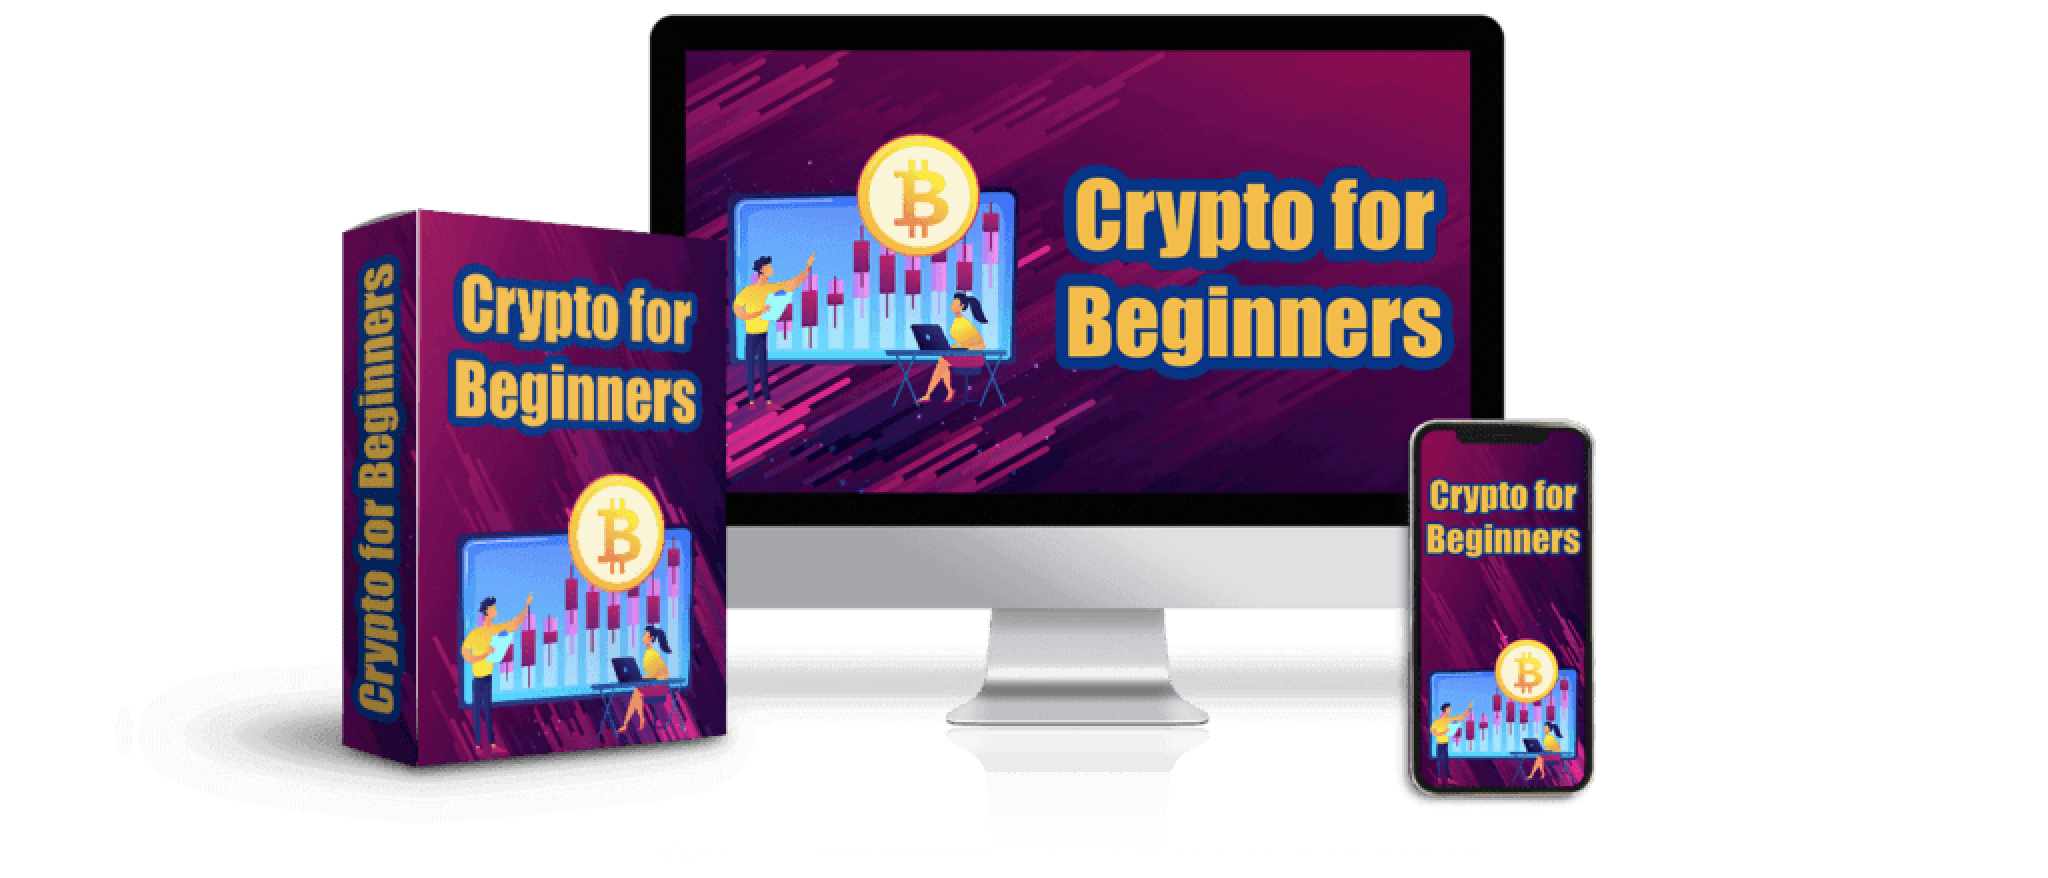 Crypto For Beginners Review & Bonuses - Should I Get This Training?